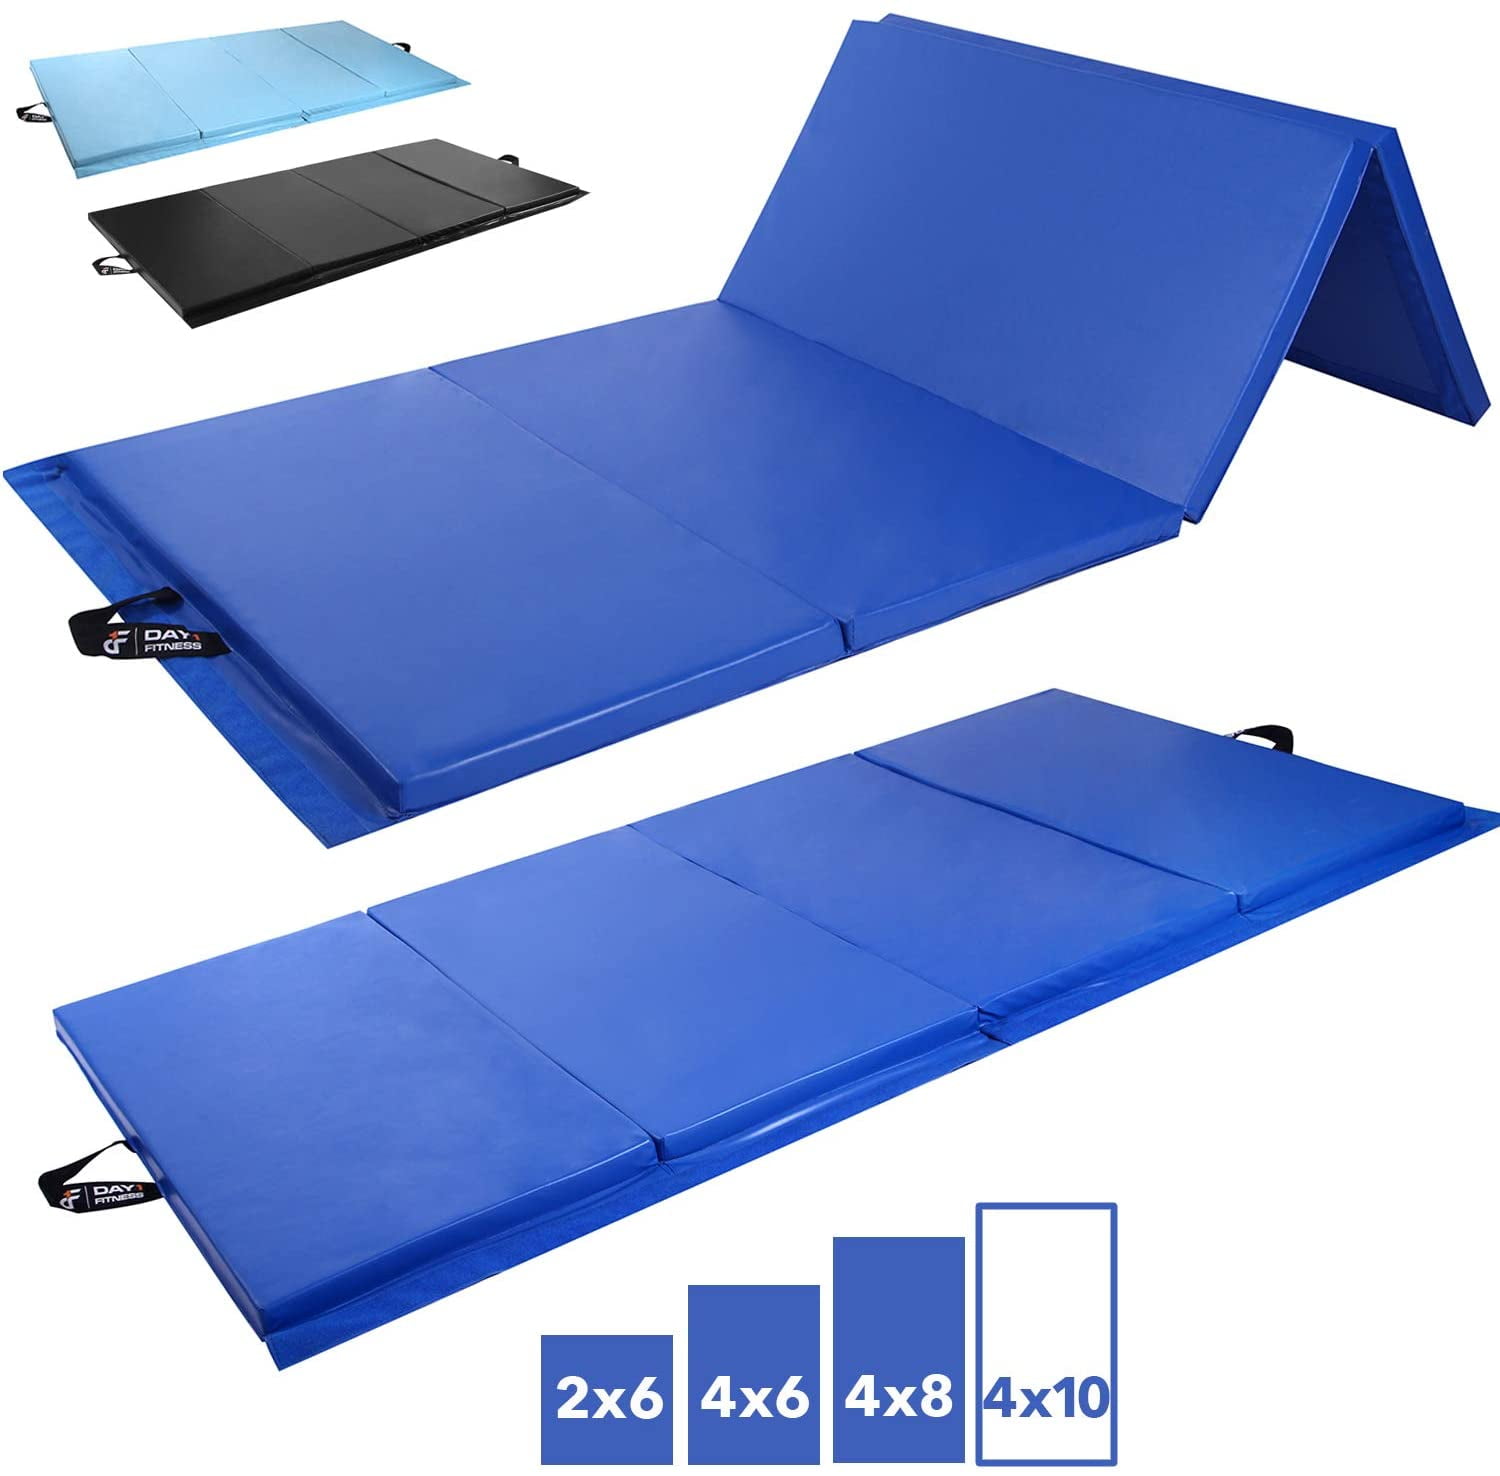 Foldable 4 Sizes in 3 Colors Available Workout Equipment Tumbling Mats for Home Routines High-Density Foam Yoga Aerobics Gymnastics Exercise Folding Gymnastics Gym Mat by Day 1 Fitness